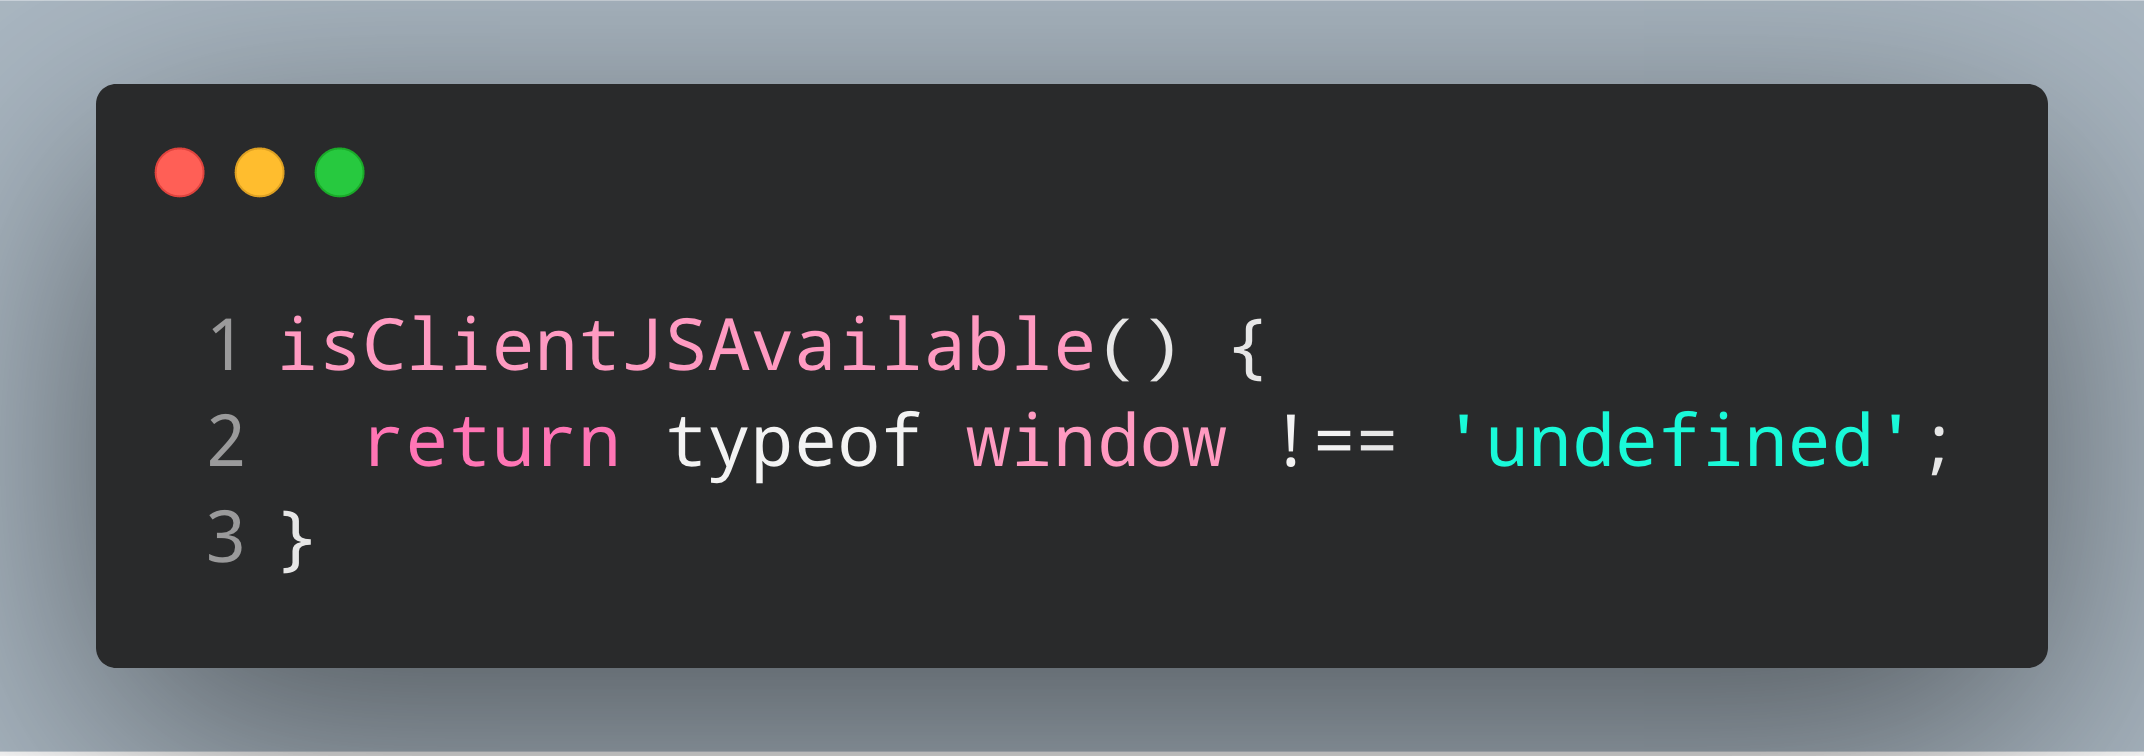 Code that reads: isClientJSAvailable() { return typeof window !== "undefined" }